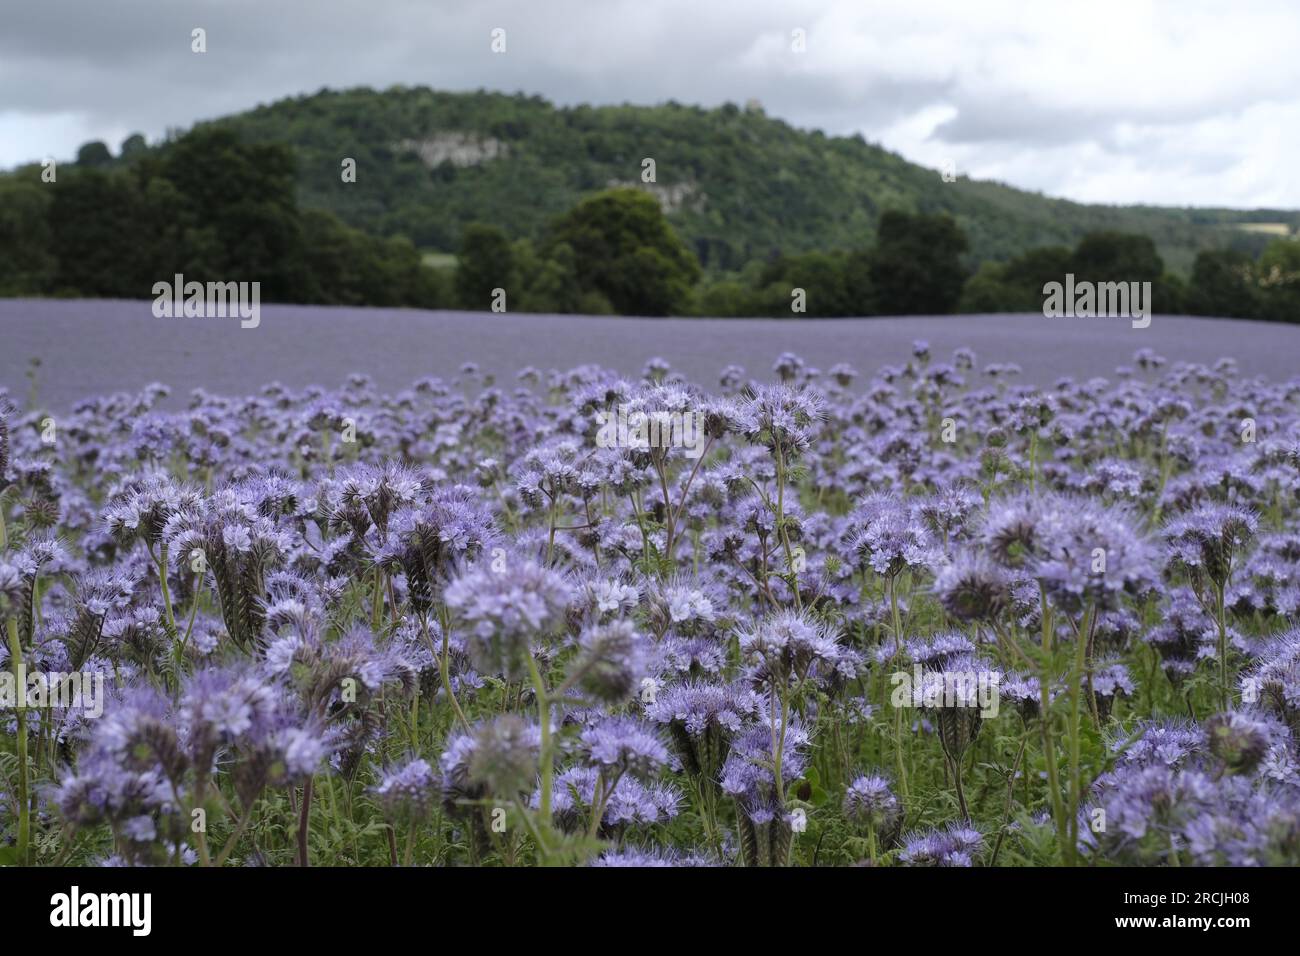 Denholm, UK. 15th July, 2023. Farm crop, Phacelia, carpet the fields near to Denholm in the Scottish Borders. The crop used as a soil improving green manure. An annual species. Phacelia is effective at preventing nitrogen leaching and suppressing weeds, due to its fast establishment. Although not known as a deep rooted species, its dense zone of shallow roots are very good at conditioning the top 3-4cm of soil. Credit: Rob Gray/Alamy Live News Stock Photo